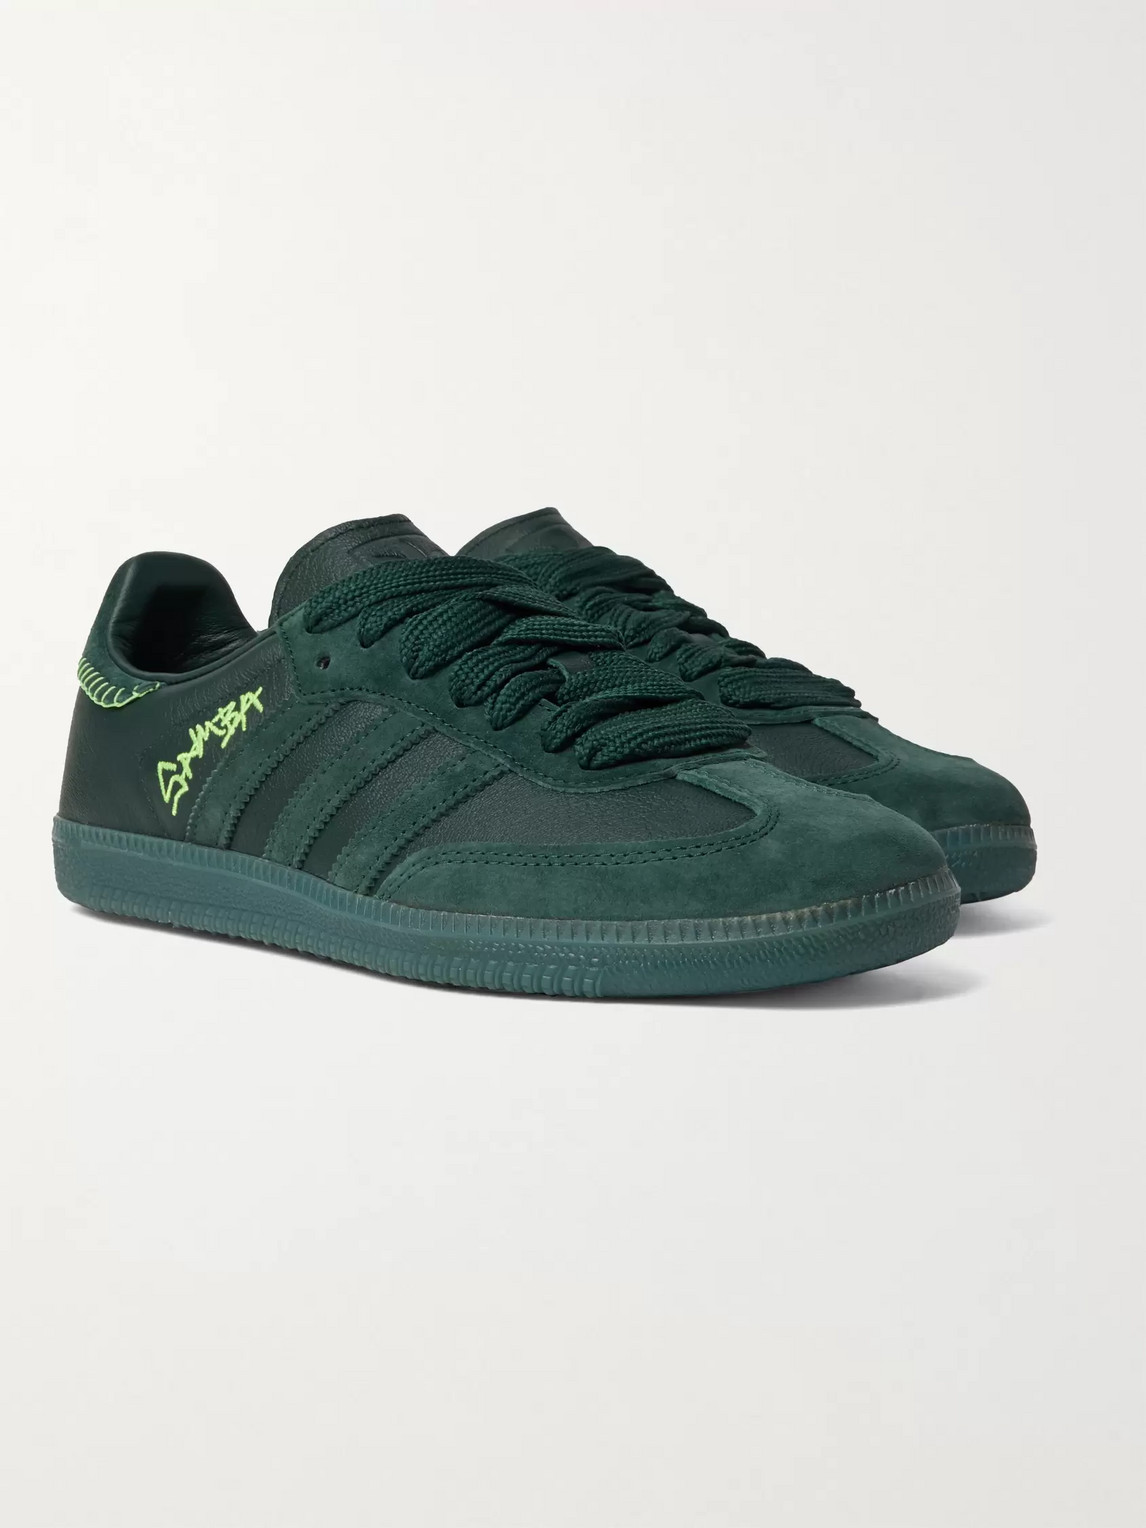 Adidas Consortium Jonah Hill Samba Embroidered Suede And Leather Sneakers In Green